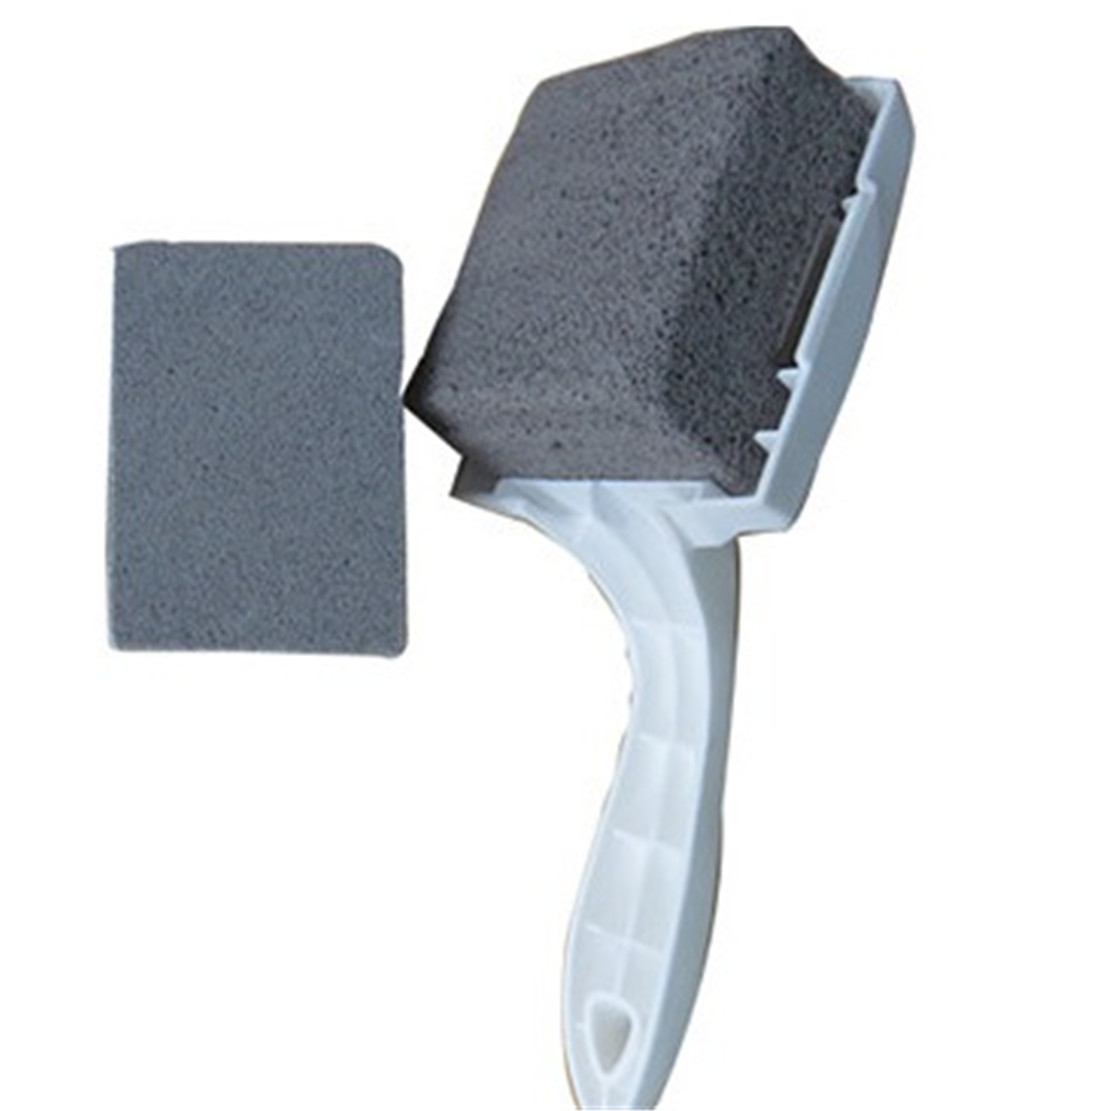 GrillStone Grill Cleaner with handle and cleaning stone